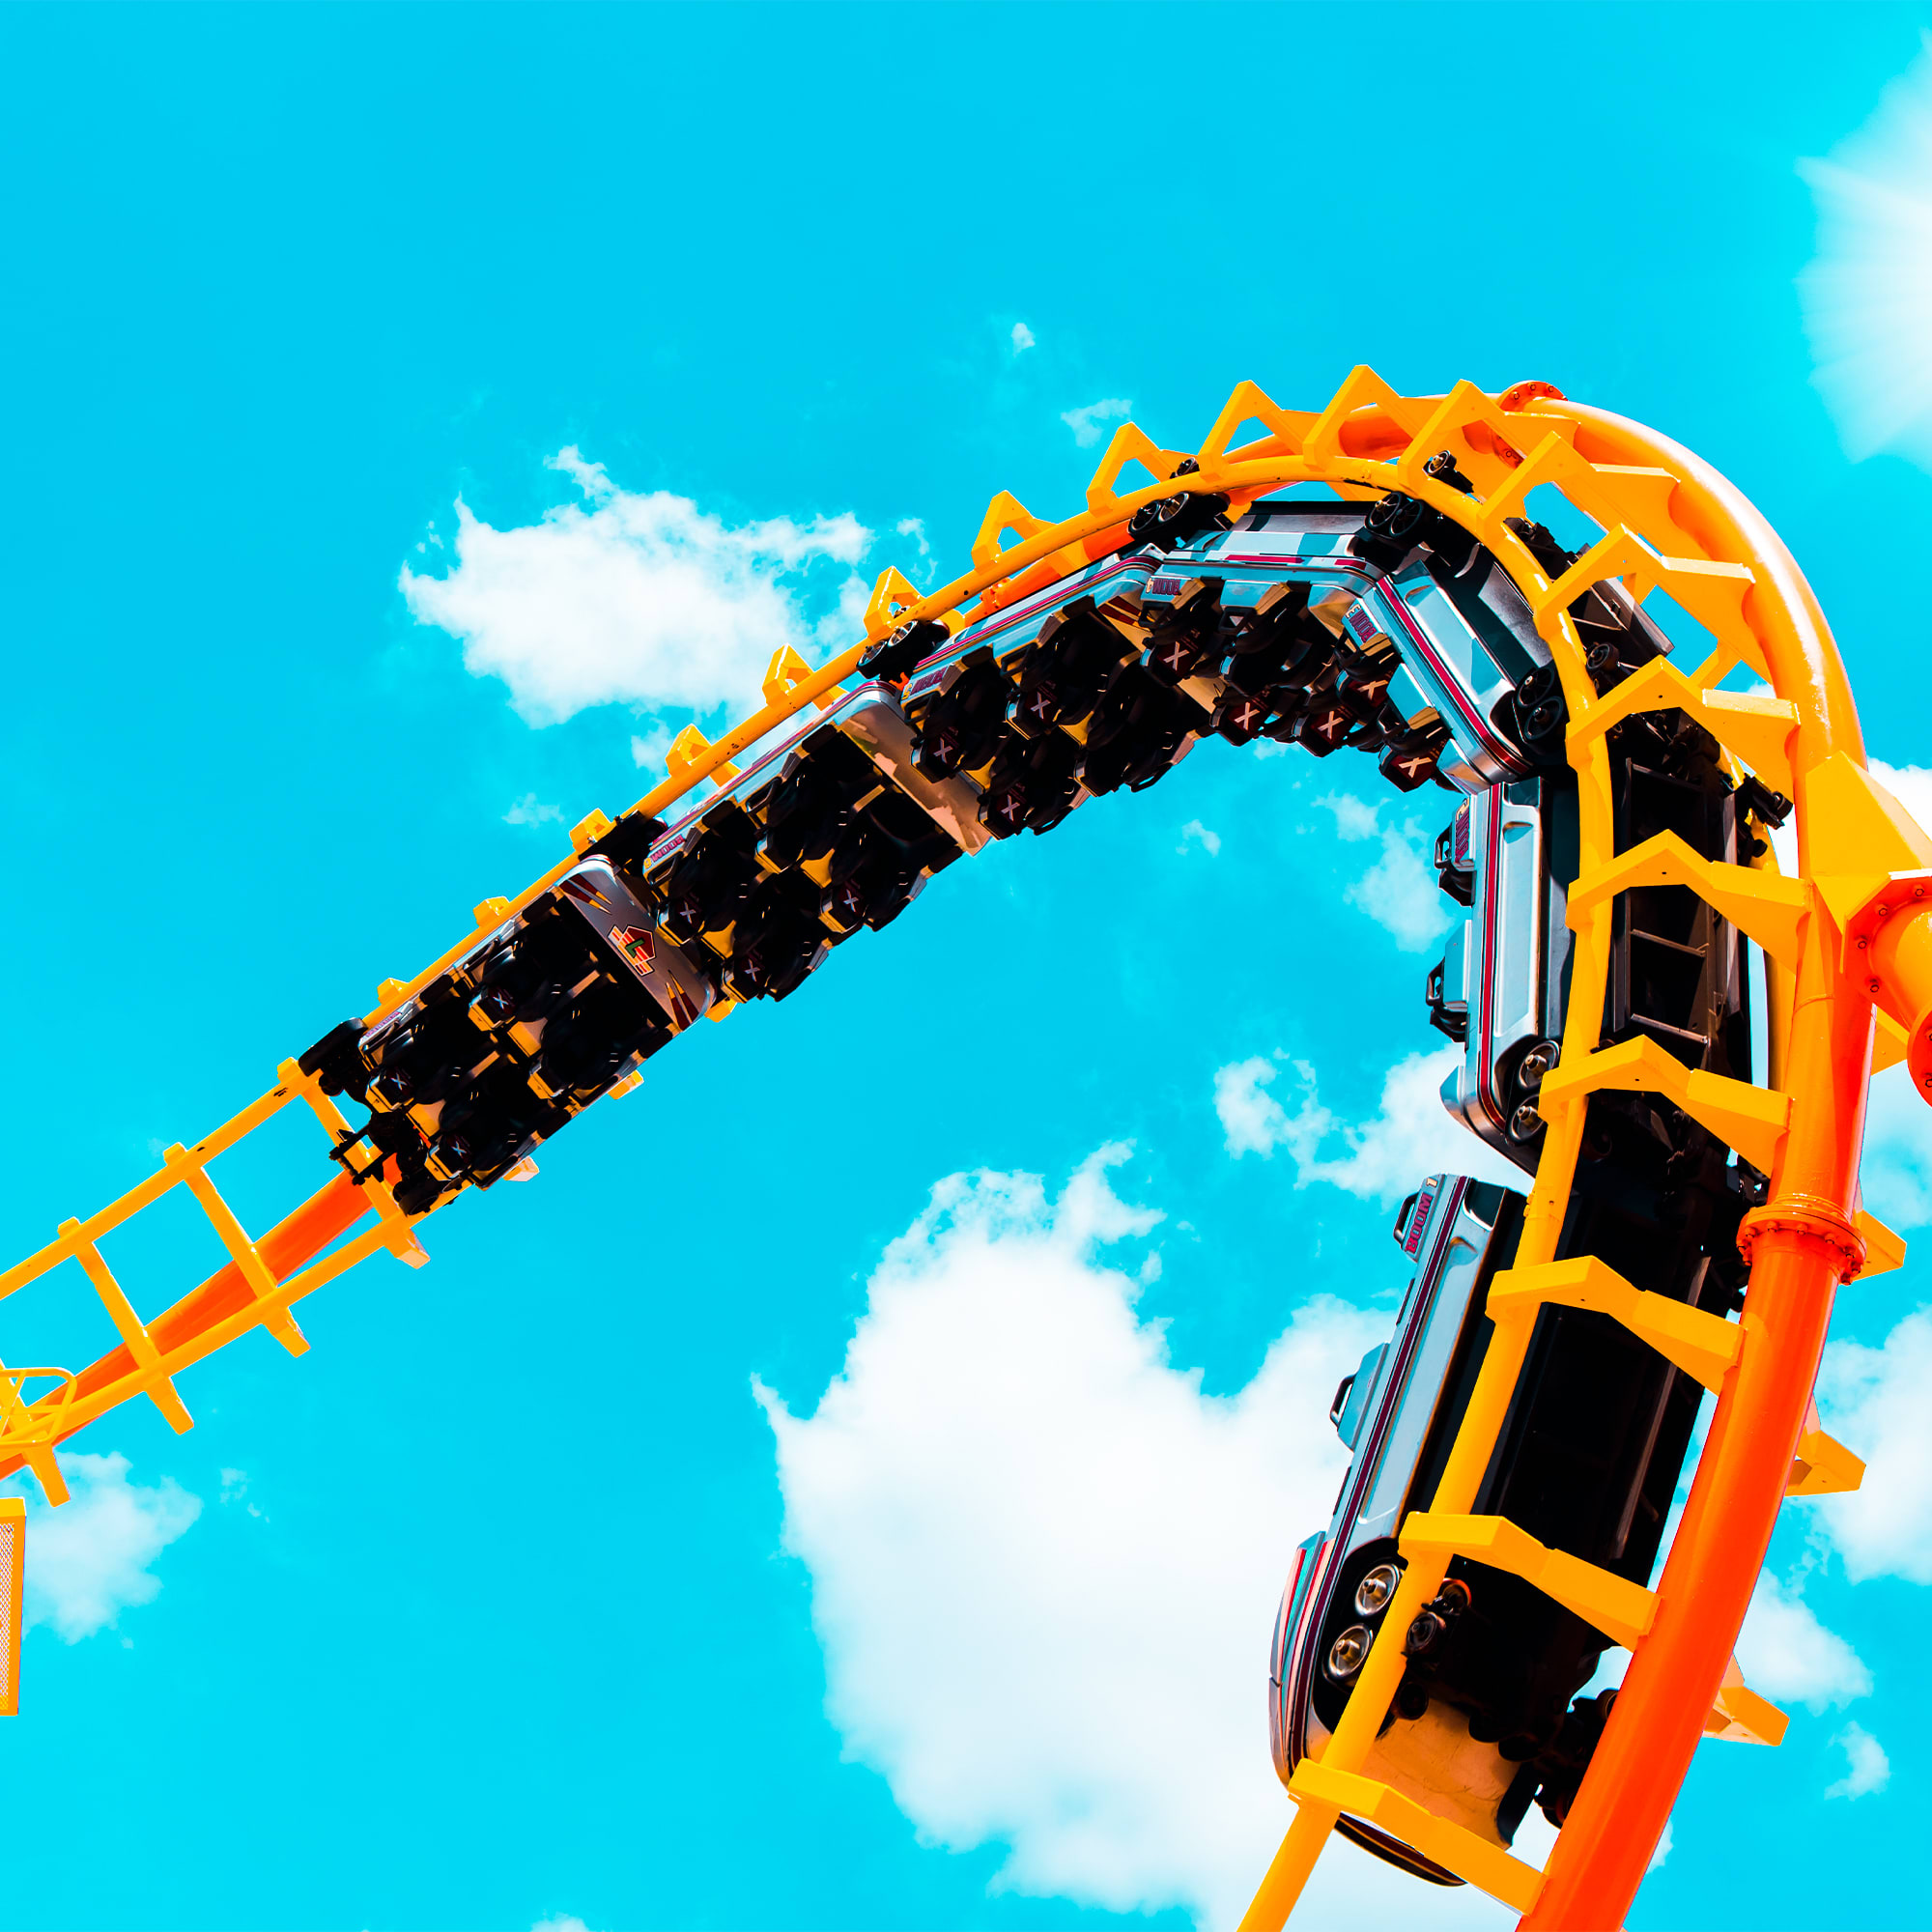 Make a splash at the top theme and water parks in Madrid. Enjoy exhilarating rides, water slides, and family-friendly attractions for a day of unforgettable fun.